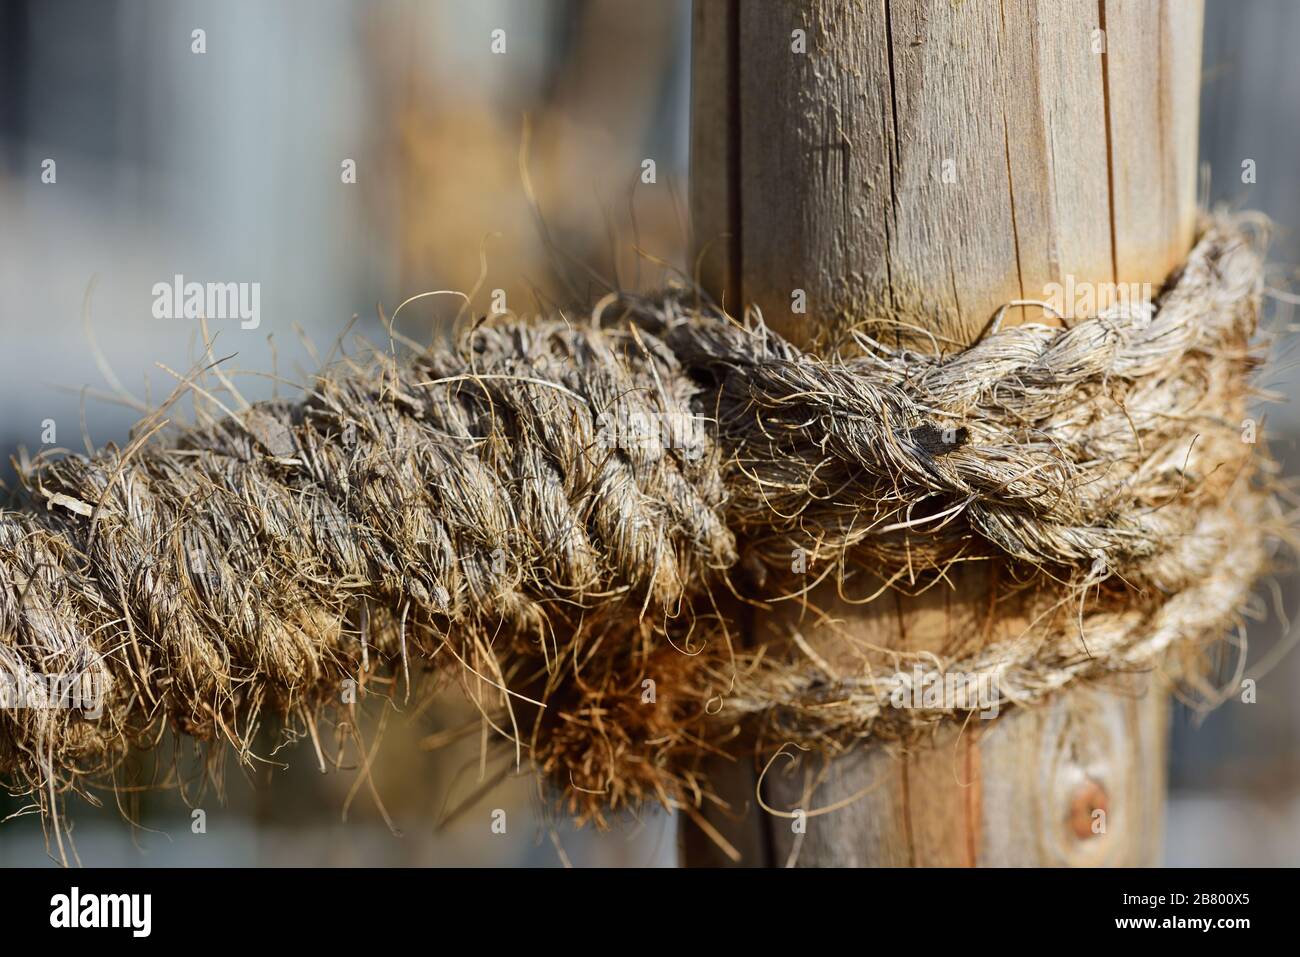 Close-up of a rustic hemp rope tied to a wooden stake to support a young tree Stock Photo